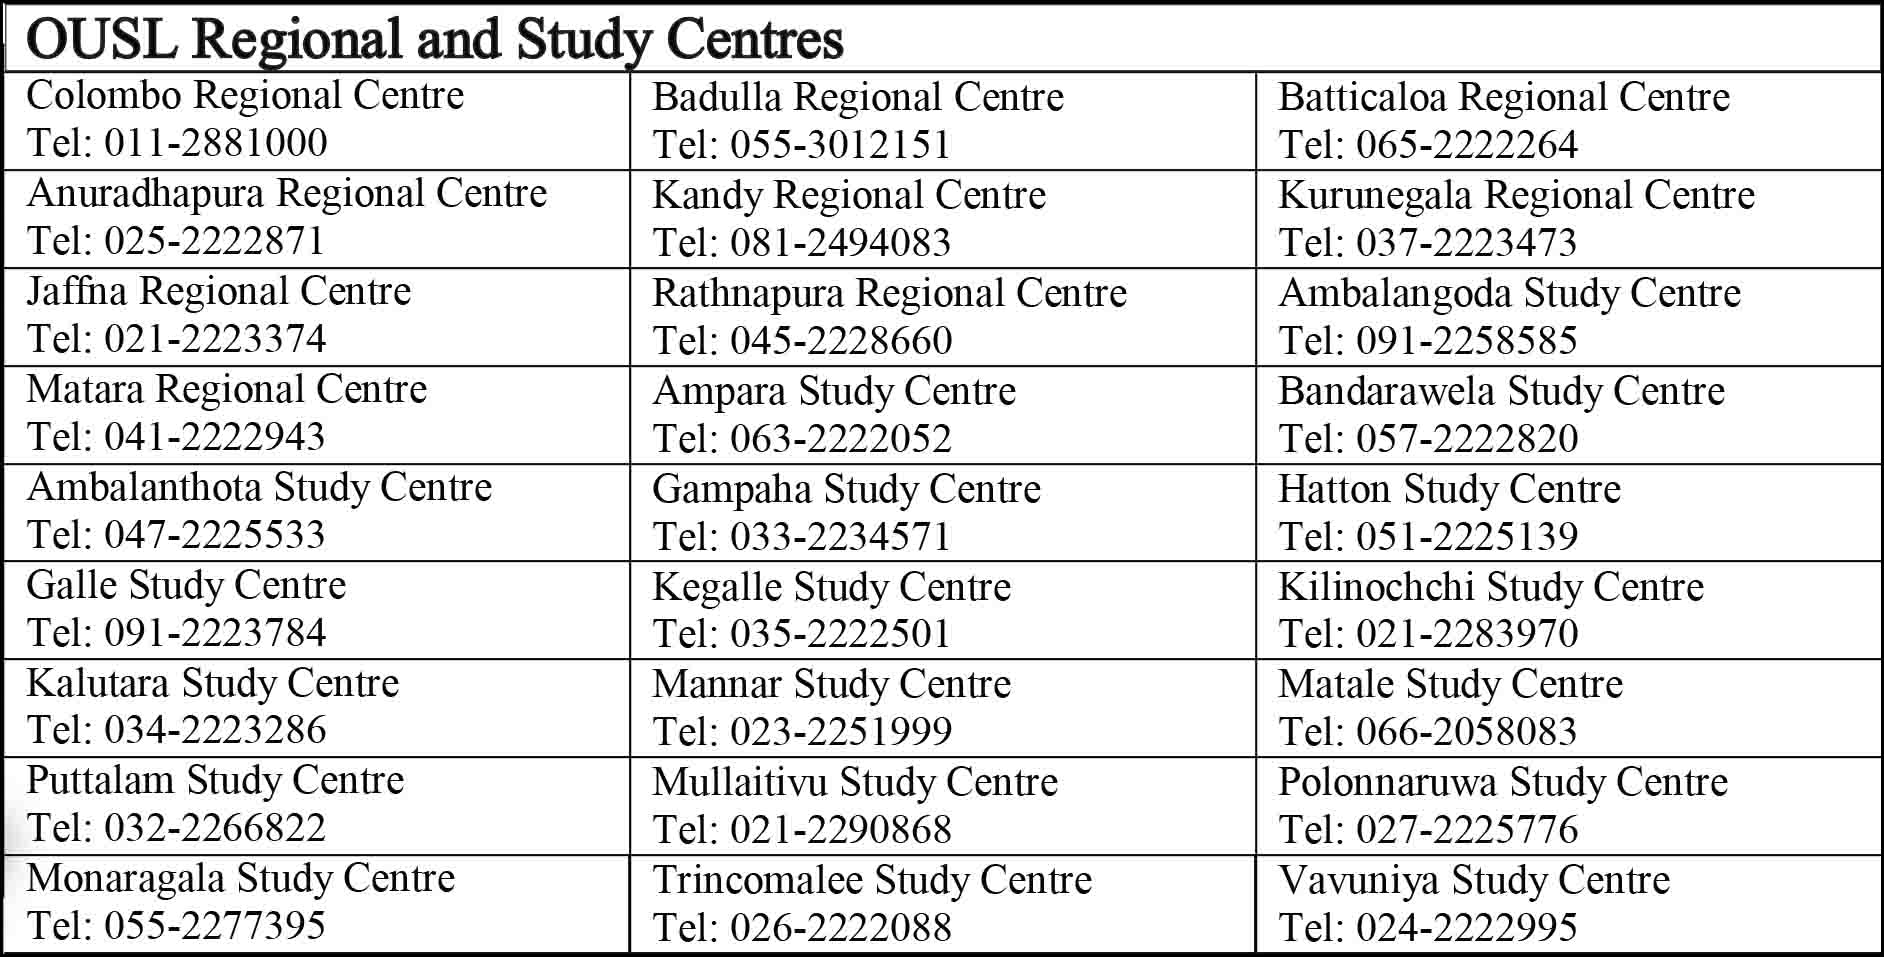 OUSL Regional and Study Centres